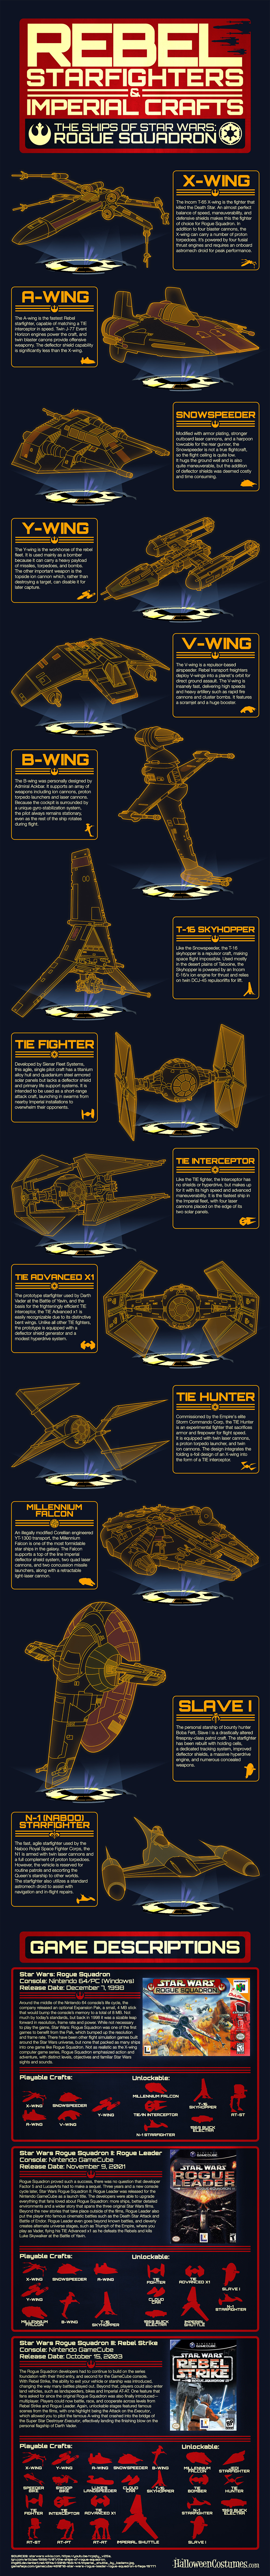 Rebel Starfighters and Imperial Craft: The Ships of Rogue Squadron